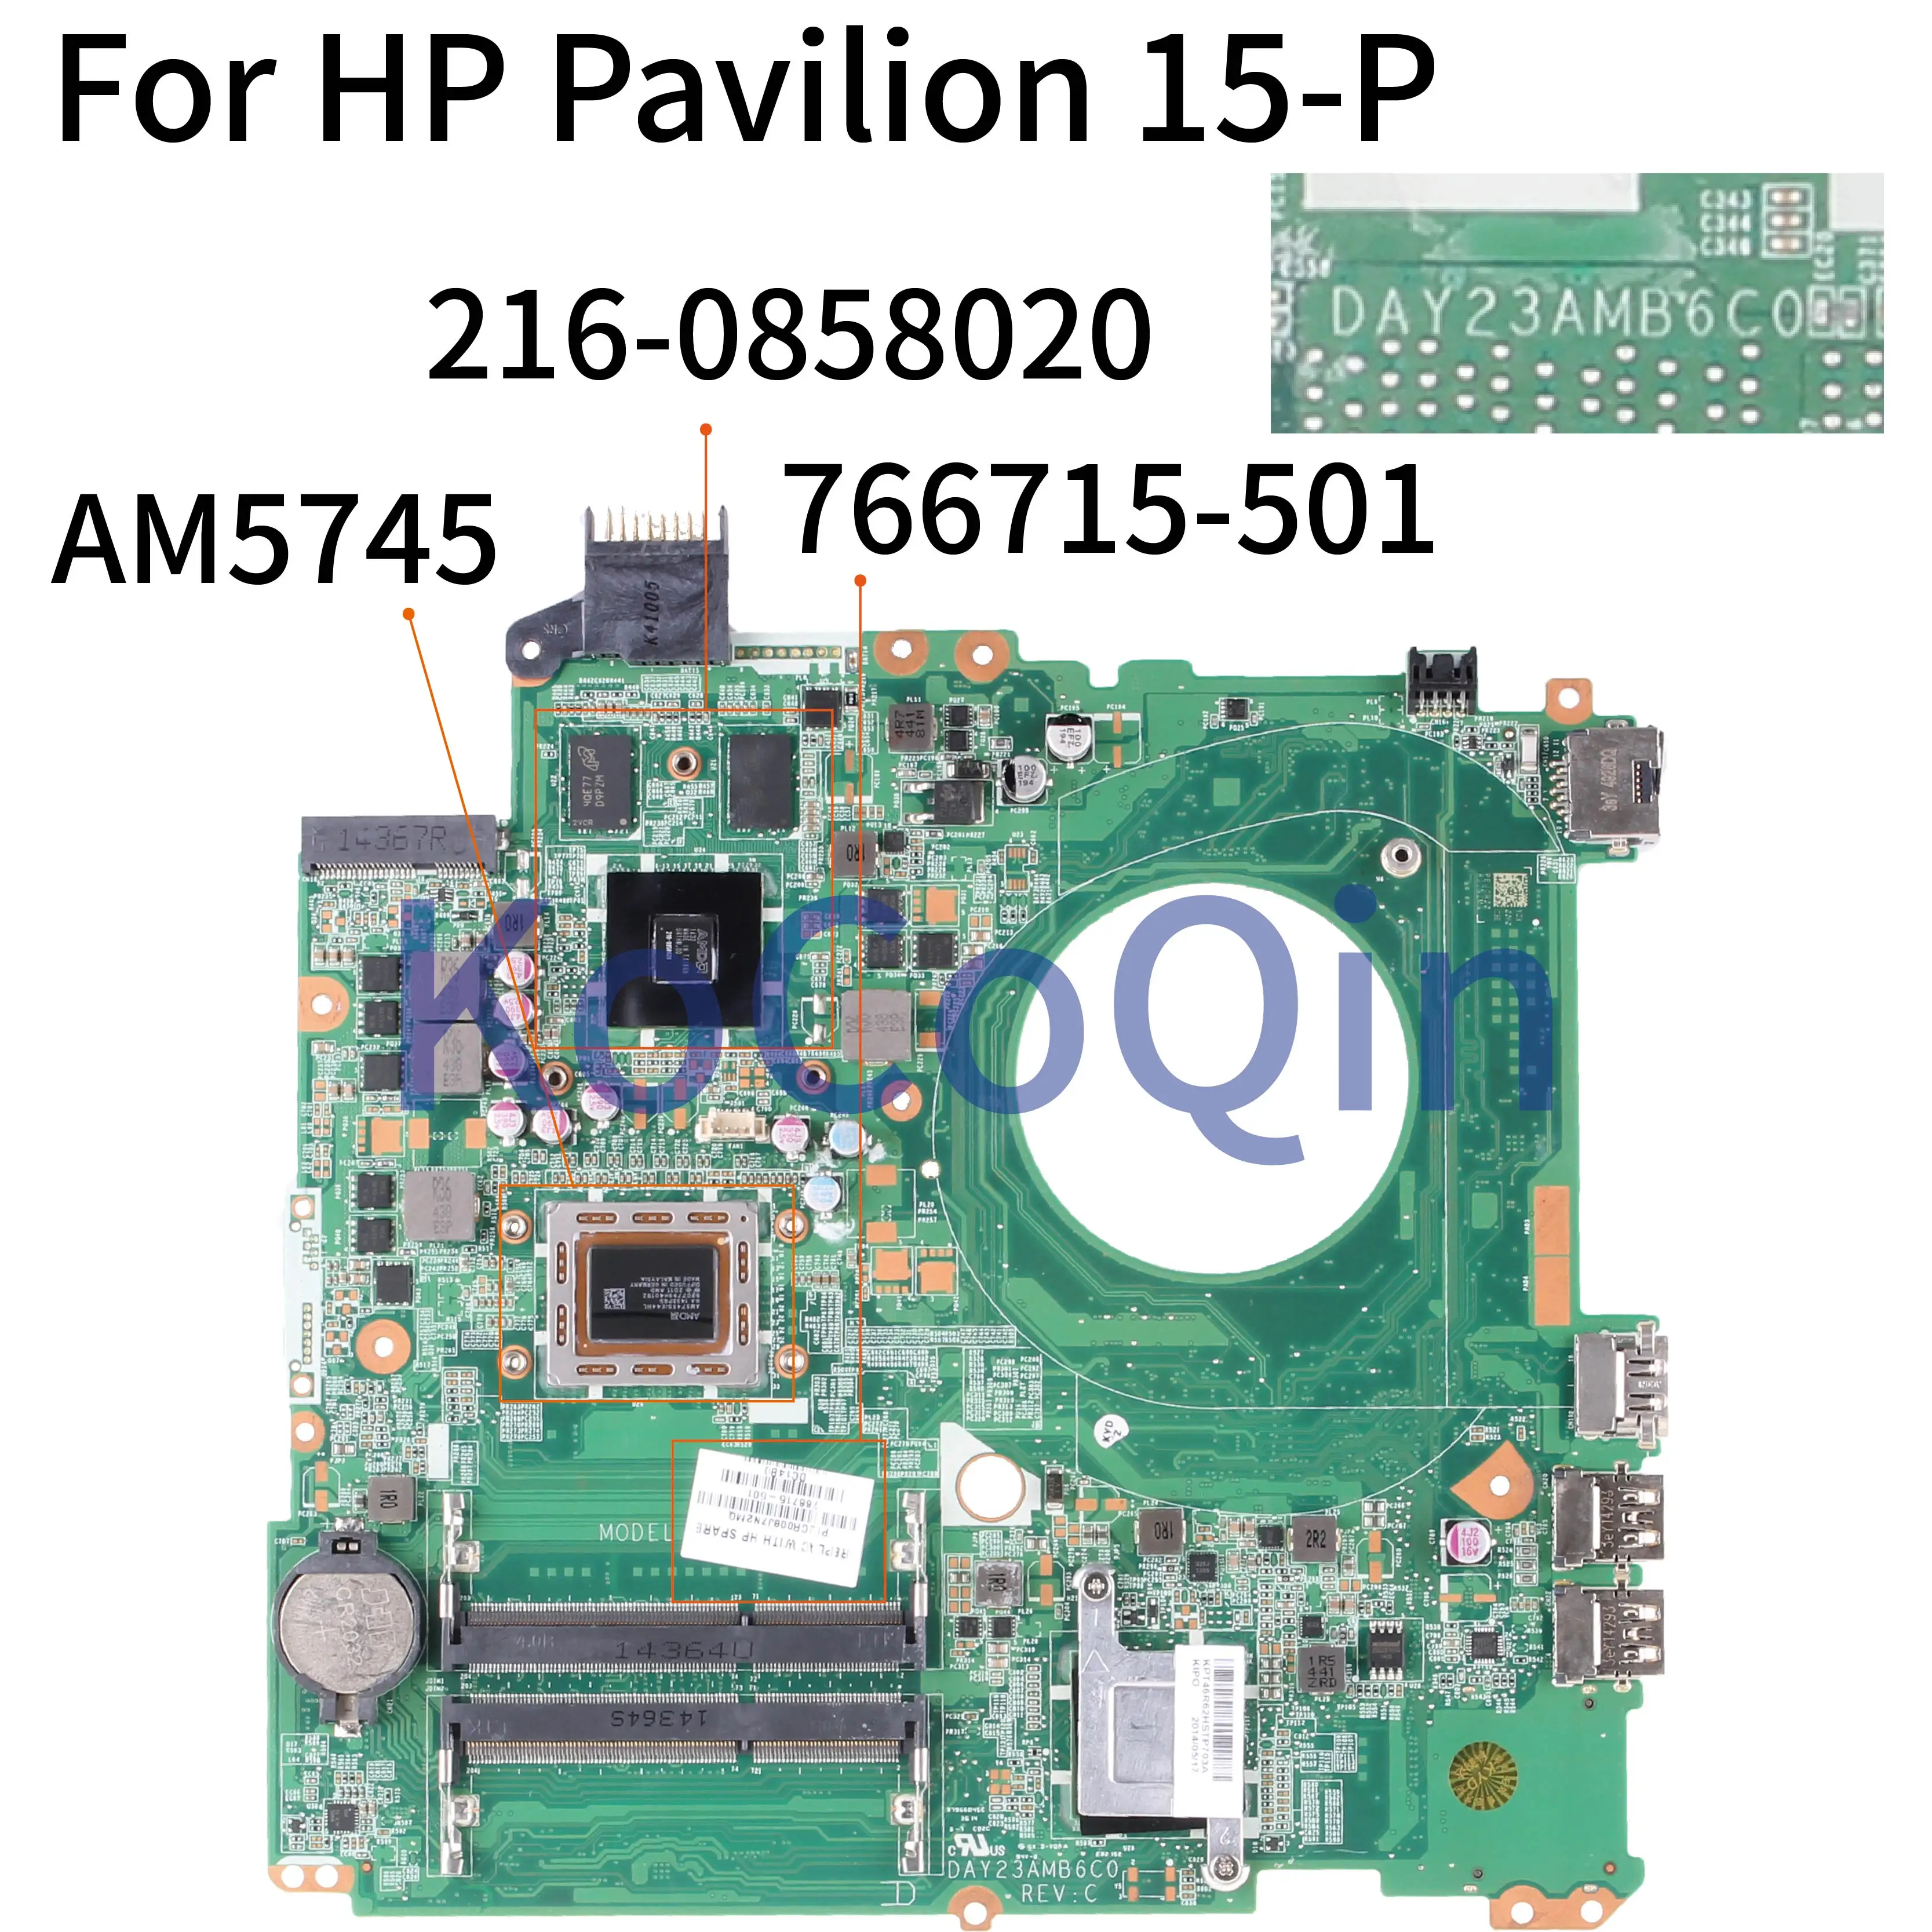 Buy  KoCoQin Laptop motherboard For HP Pavilion 15-P Series AM5745 216-0858020 Mainboard 766715-001 7667